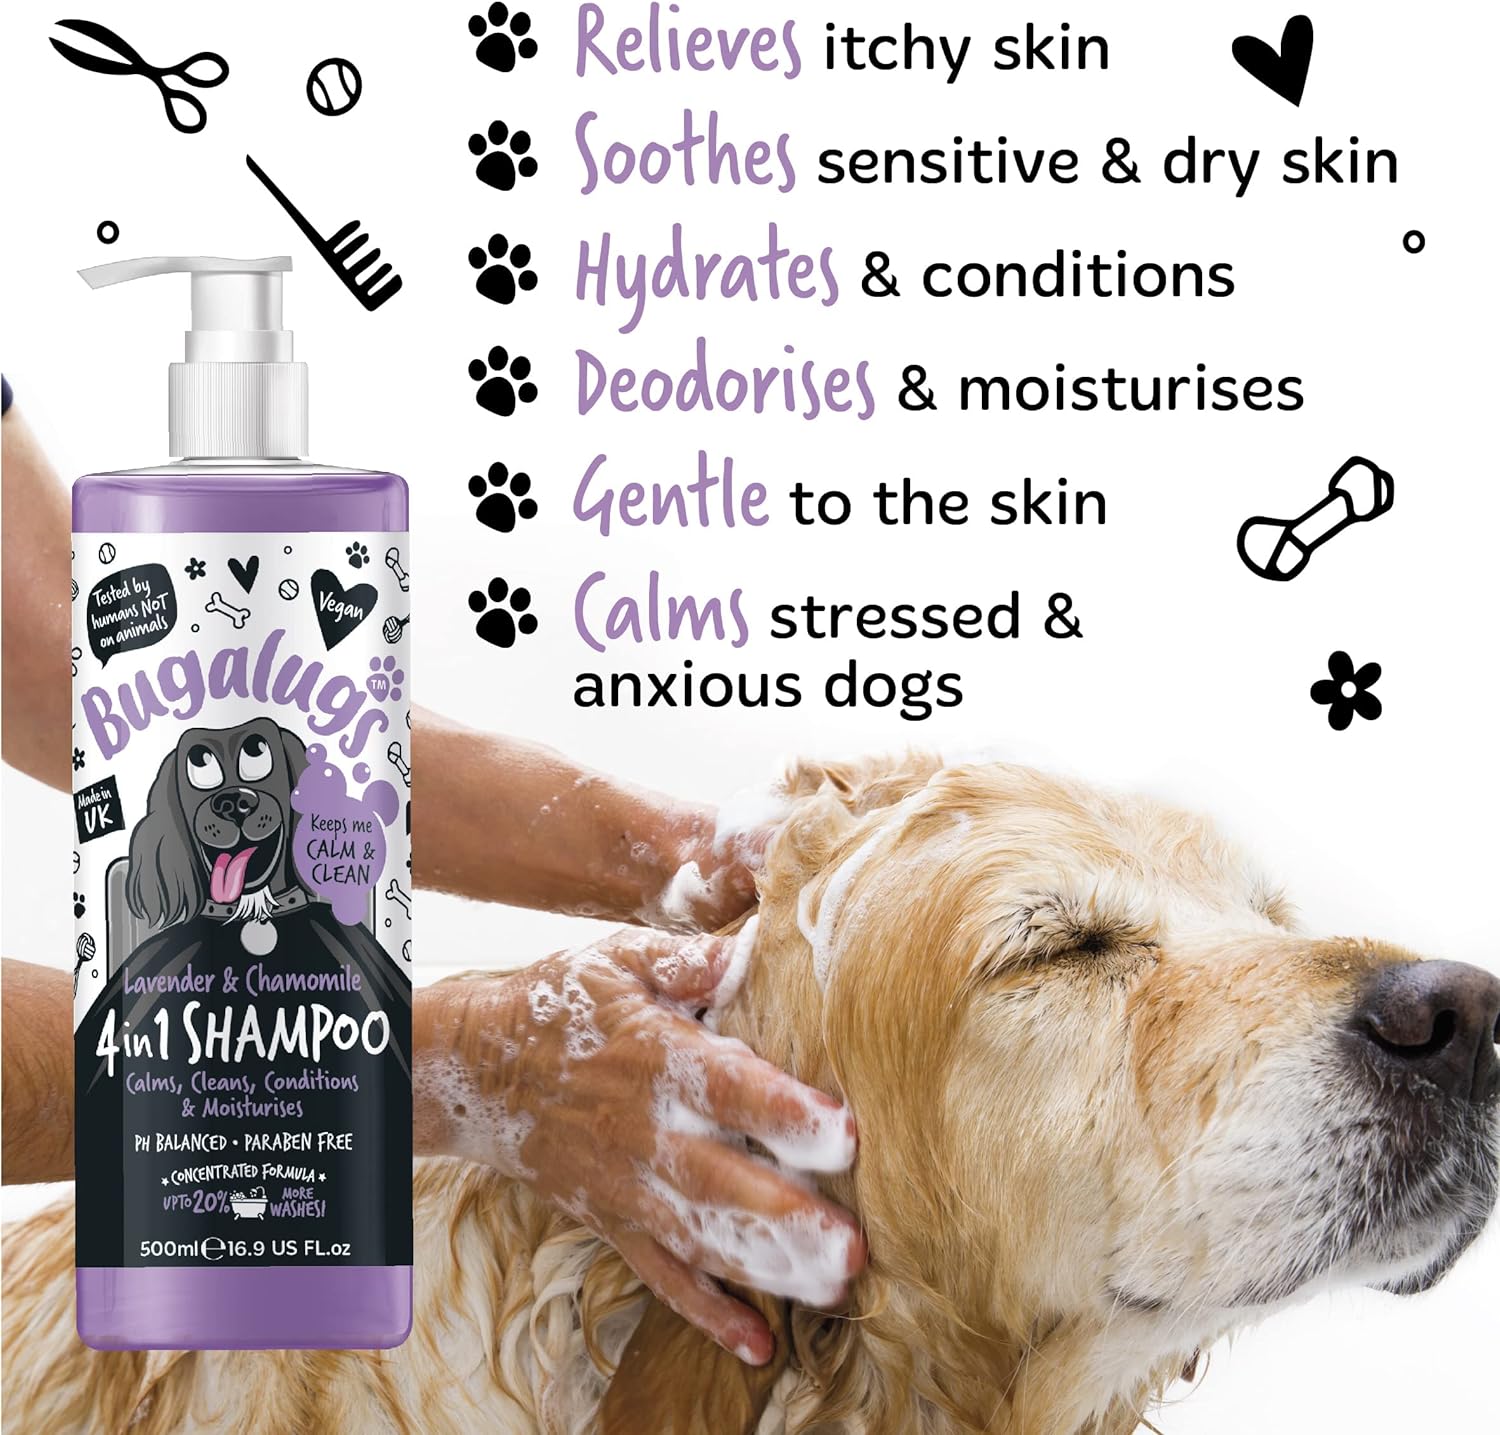 Dog Shampoo by Bugalugs lavender & chamomile 4 in 1 dog grooming shampoo products for smelly dogs with fragrance, best puppy shampoo, professional groom Vegan pet shampoo & conditioner (1 Litre) :Pet Supplies